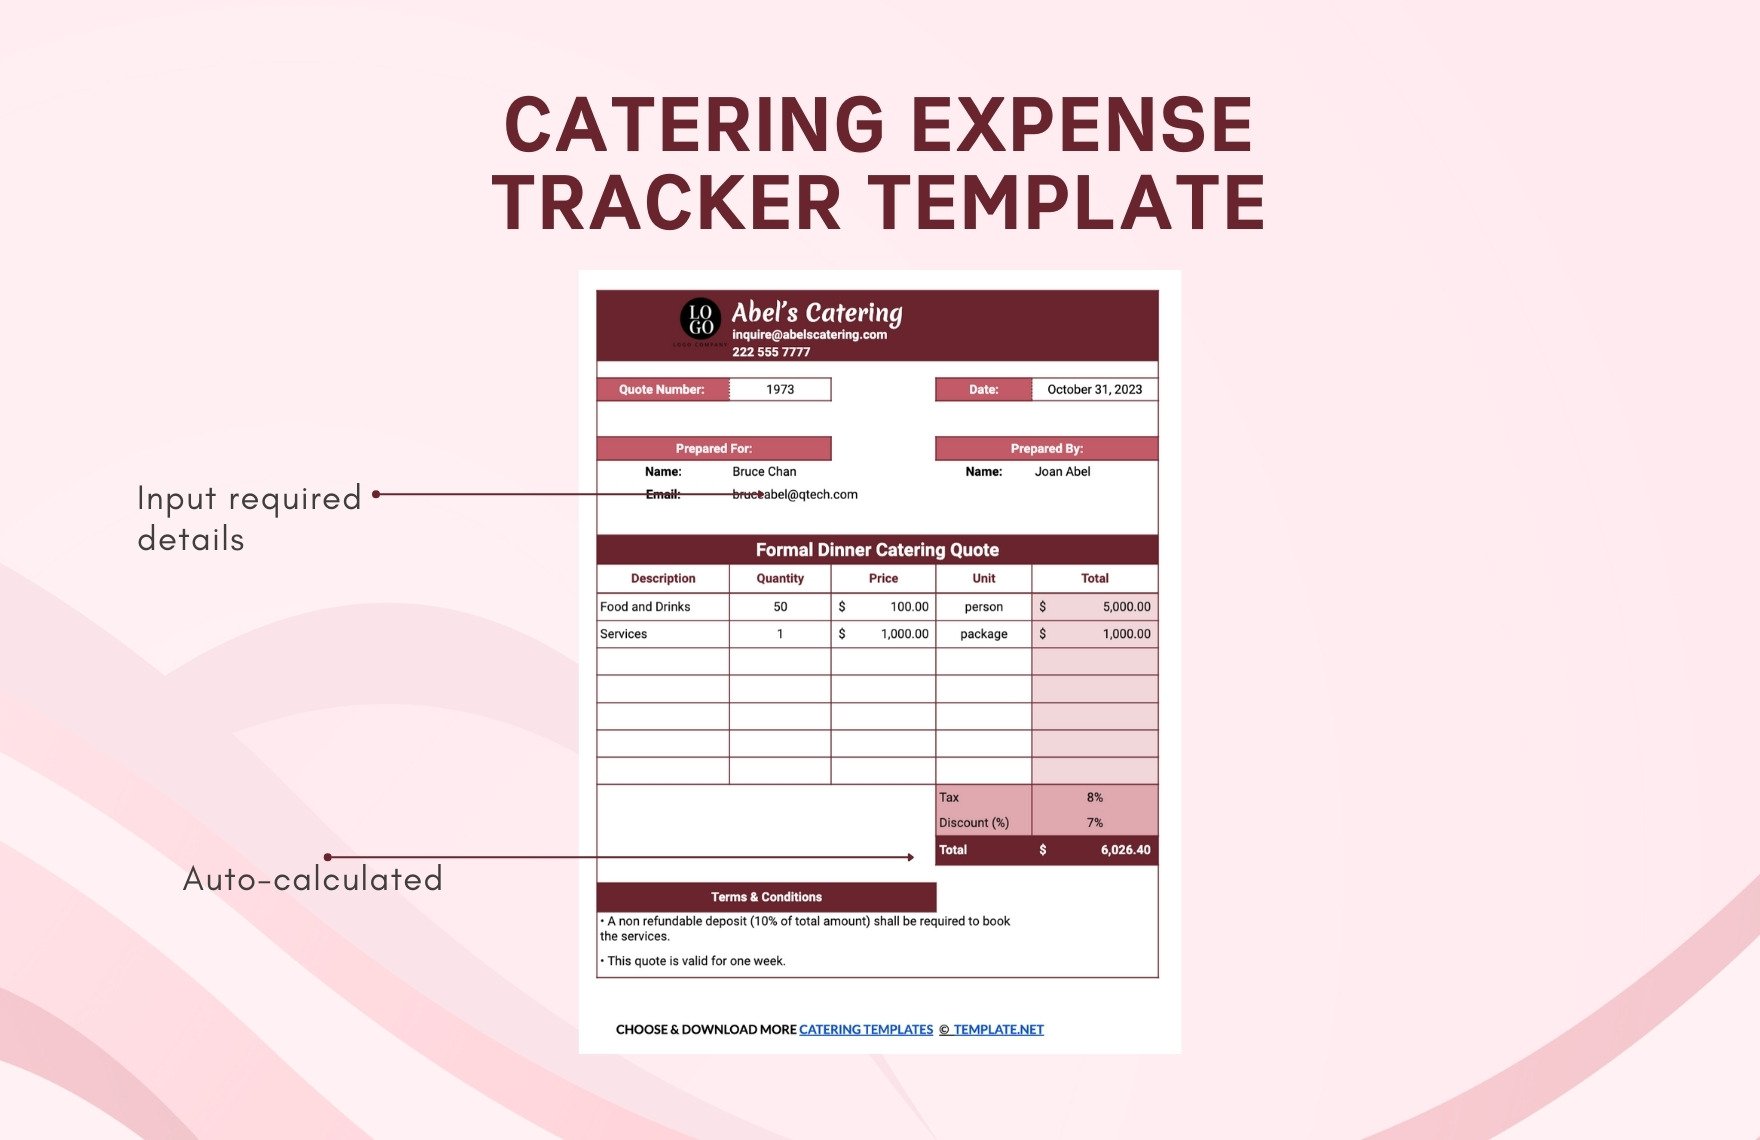 Sample Catering Quotation Template